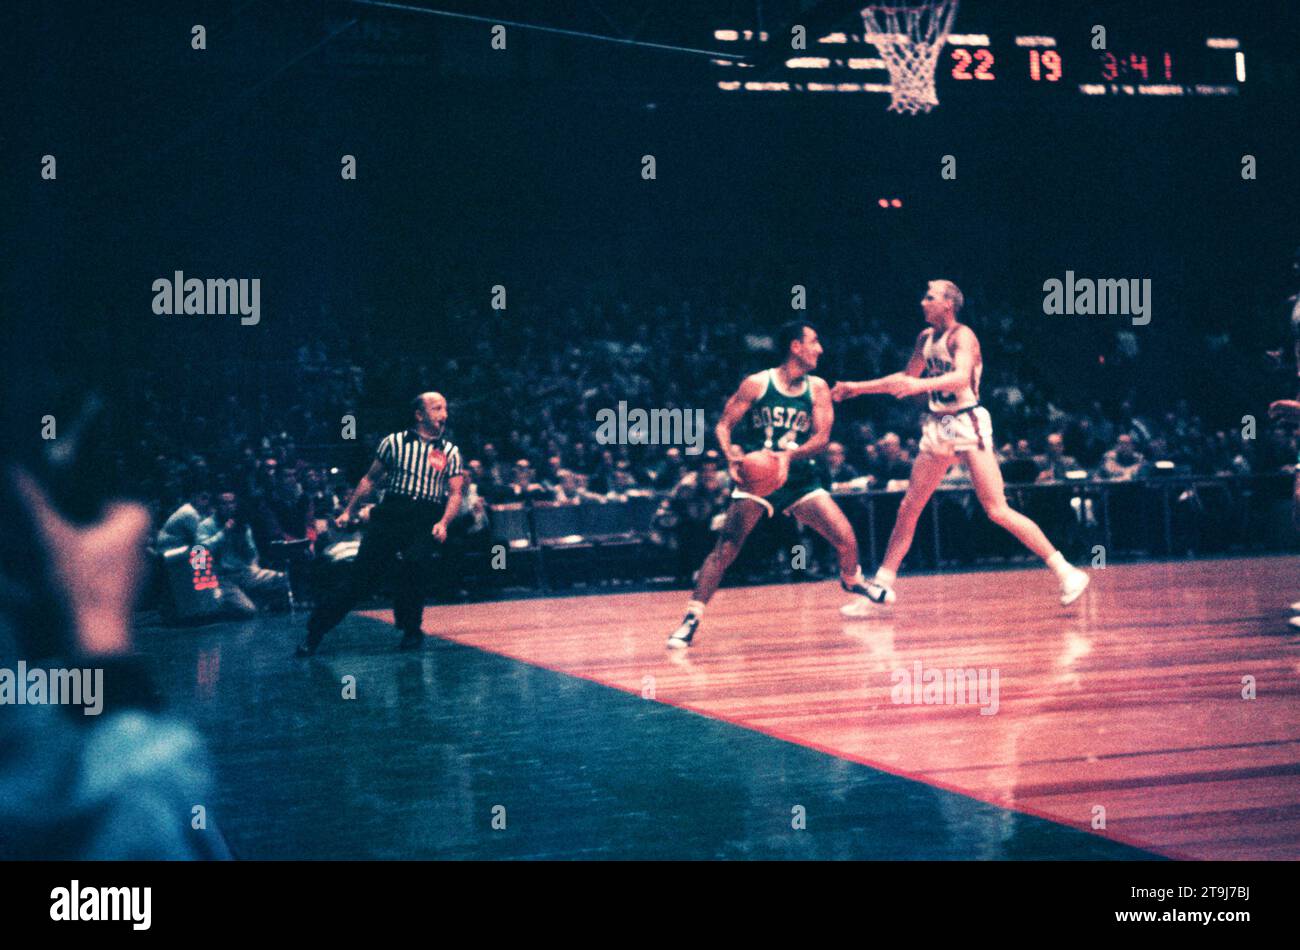 NEW YORK, NY - OCTOBER 25: Bob Cousy #14 of the Boston Celtics holds the ball as Kenny Sears #12 of the New York Knicks defends during an NBA game on October 25, 1958 at the Madison Square Garden in New York, New York.  (Photo by Hy Peskin) *** Local Caption *** Bob Cousy;Kenny Sears Stock Photo